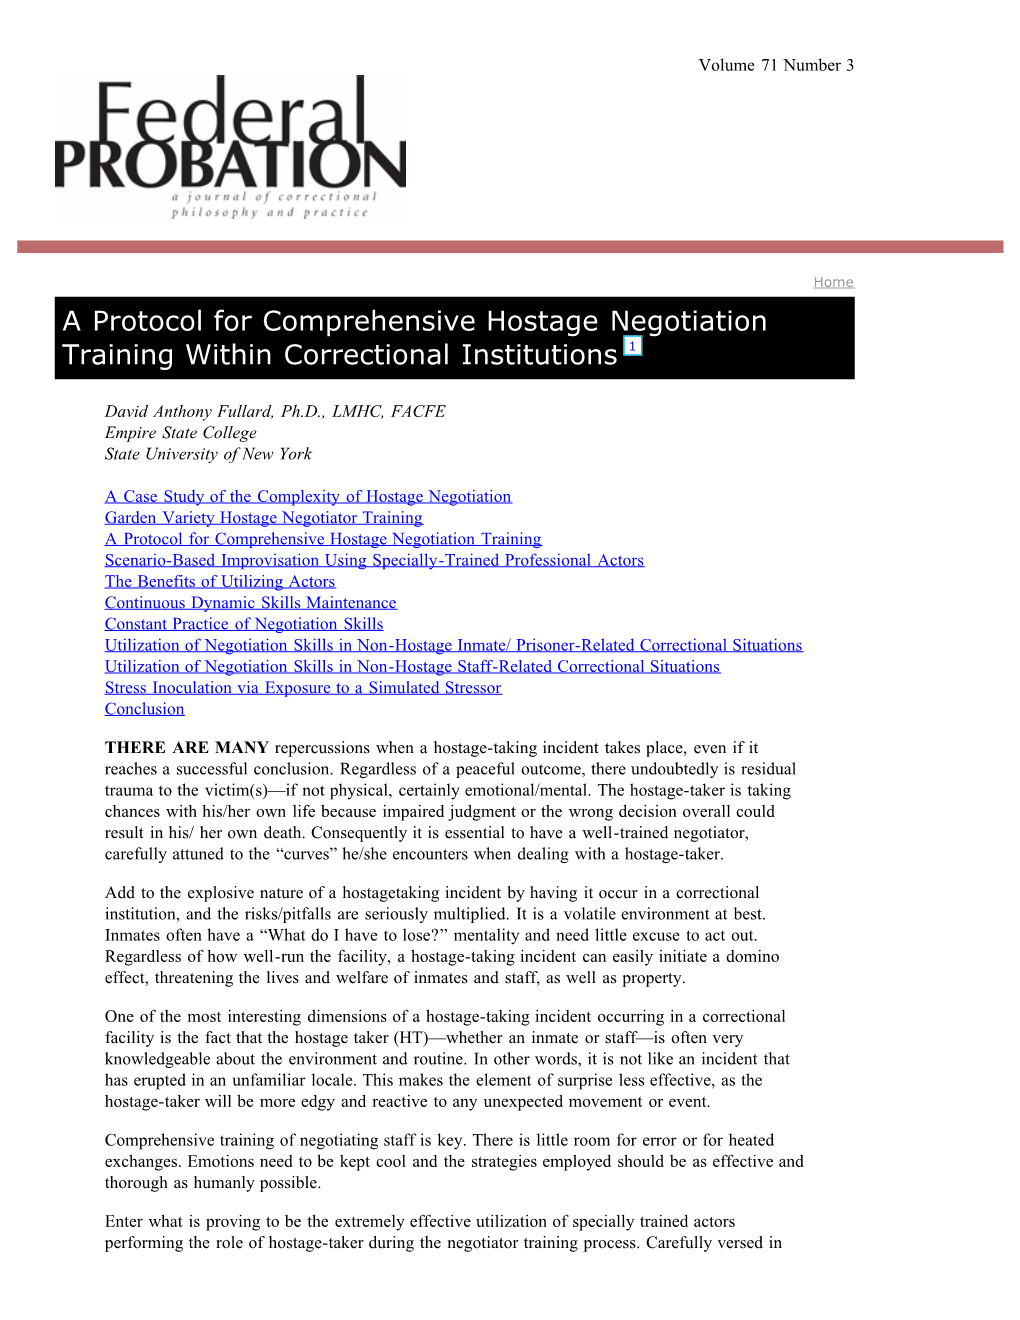 A Protocol for Comprehensive Hostage Negotiation Training Within Correctional Institutions 1